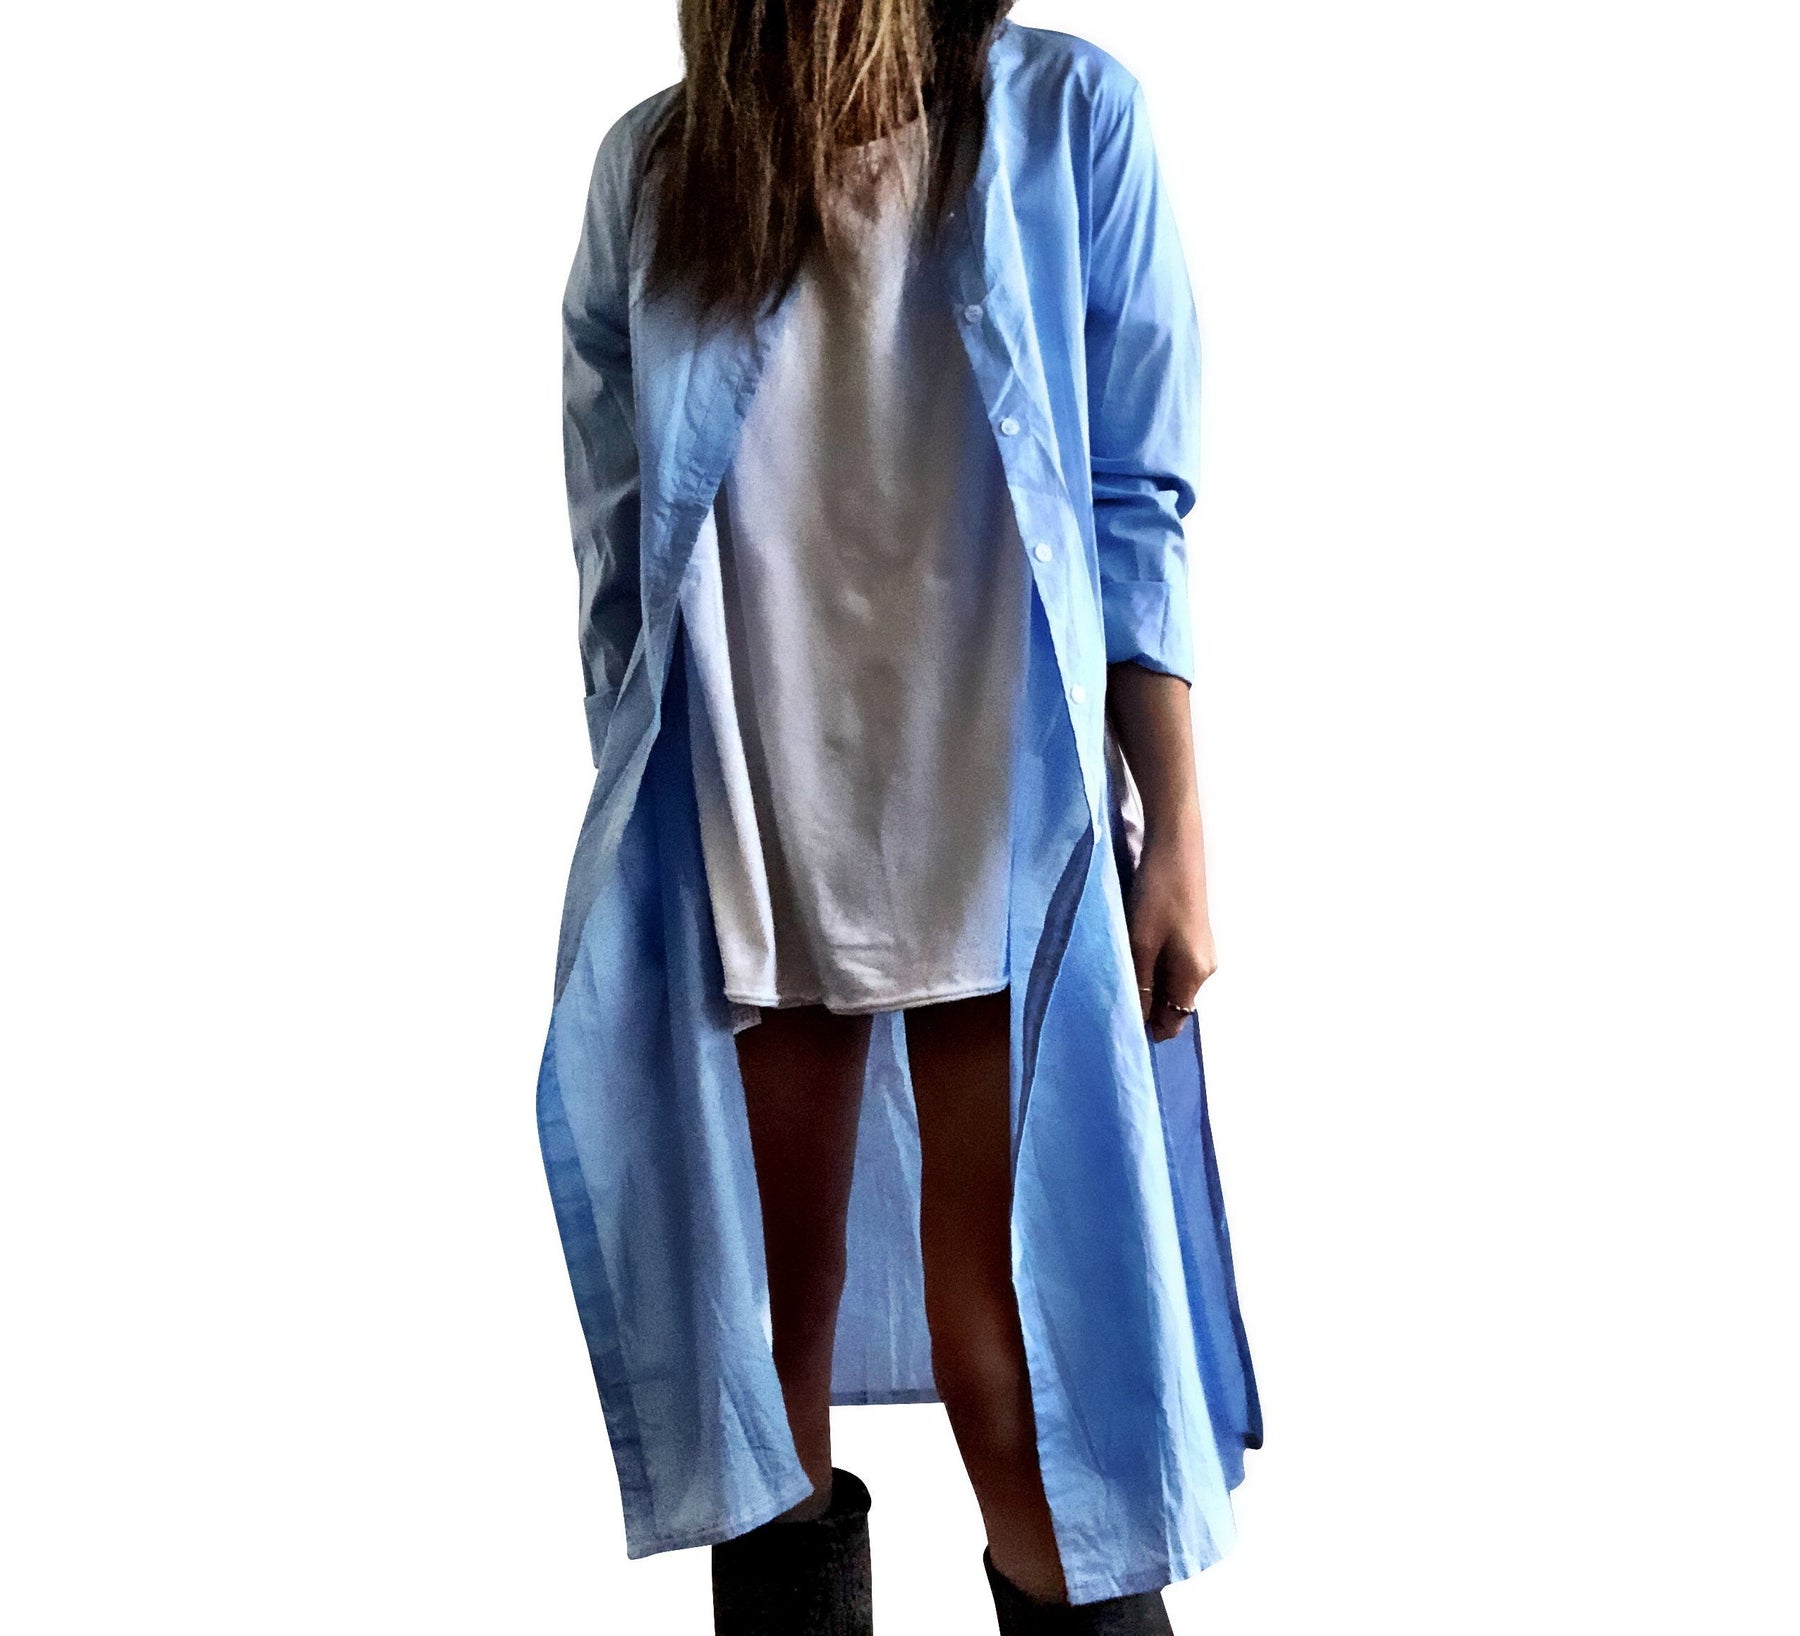 Slim fitting light blue shirt/dress, with belt. White heart with black painted drip. Can be worn as a shirt or a dress. Signed @wrenandglory.